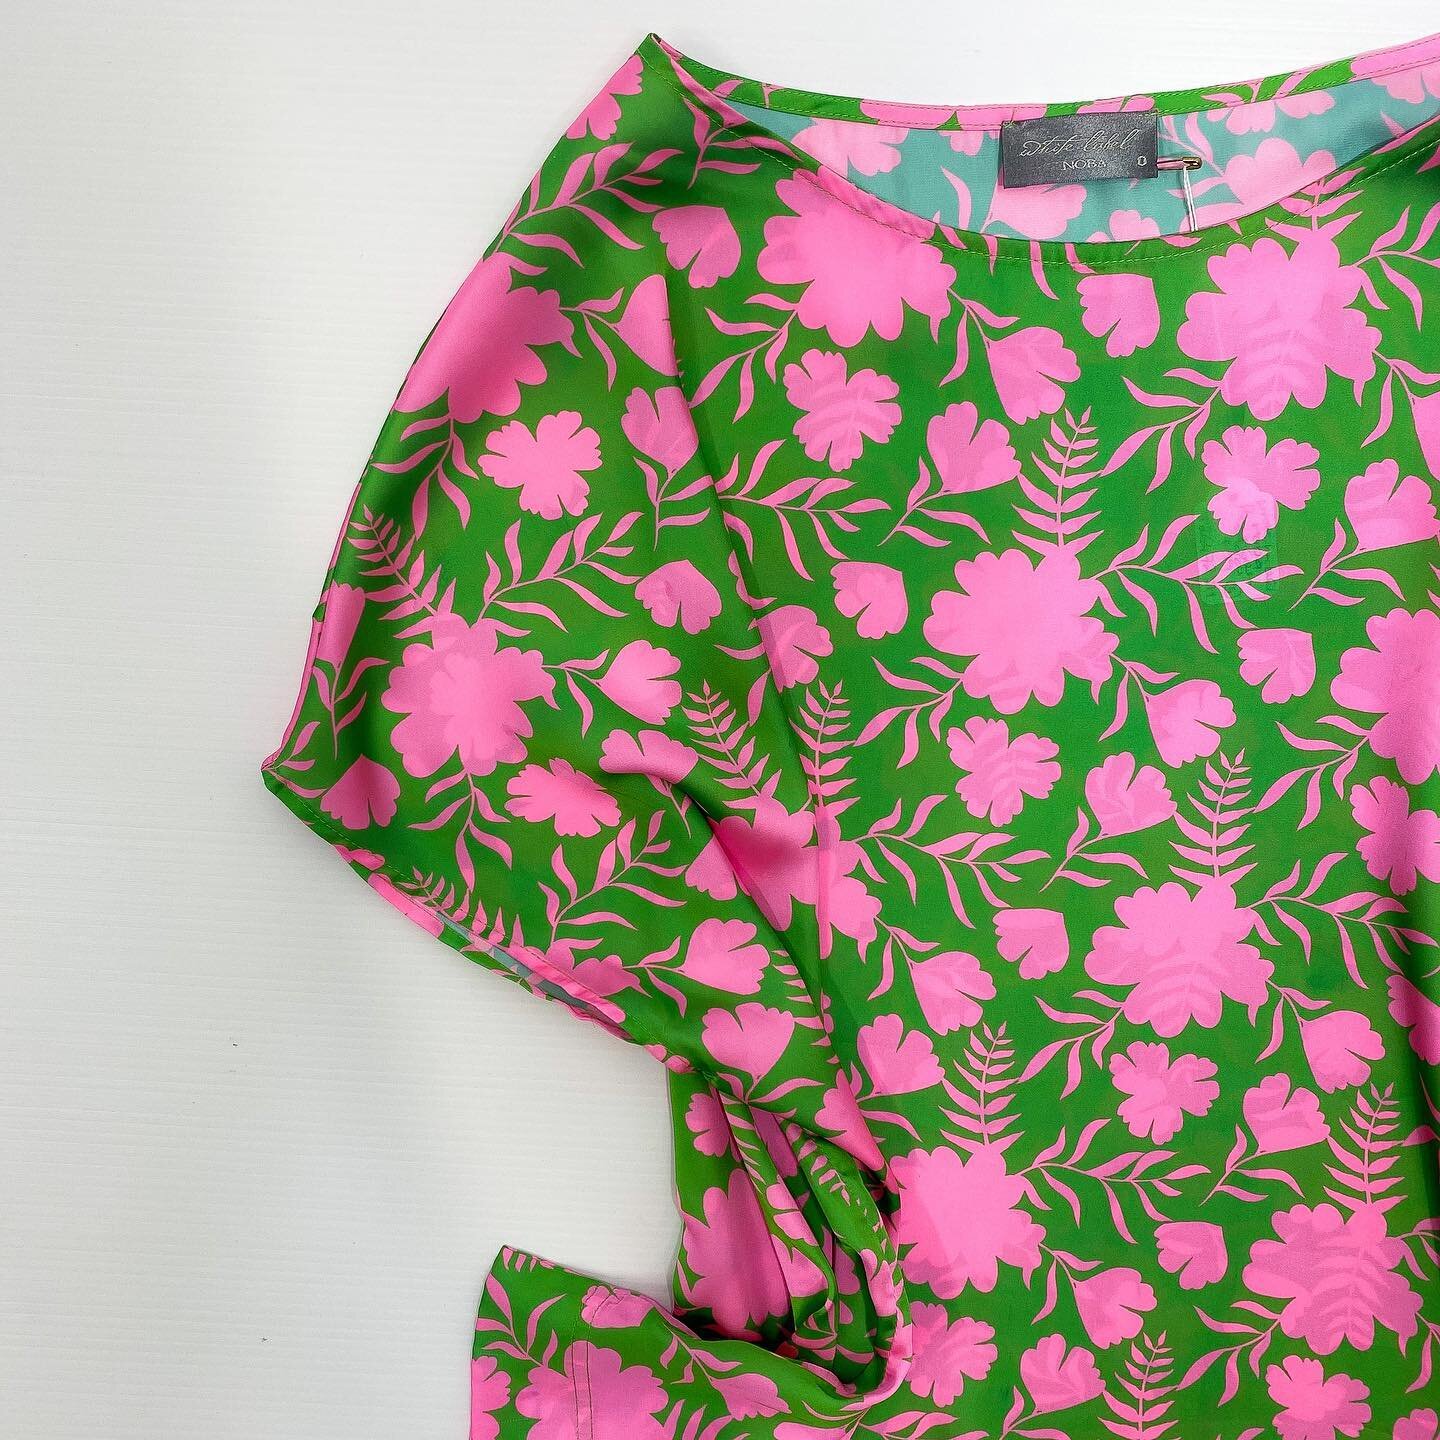 A statement top in a stunning green and pink floral design by White label Noba. Lots of gorgeous clothing has now been added to our website for your viewing. Happy Sunday 😃